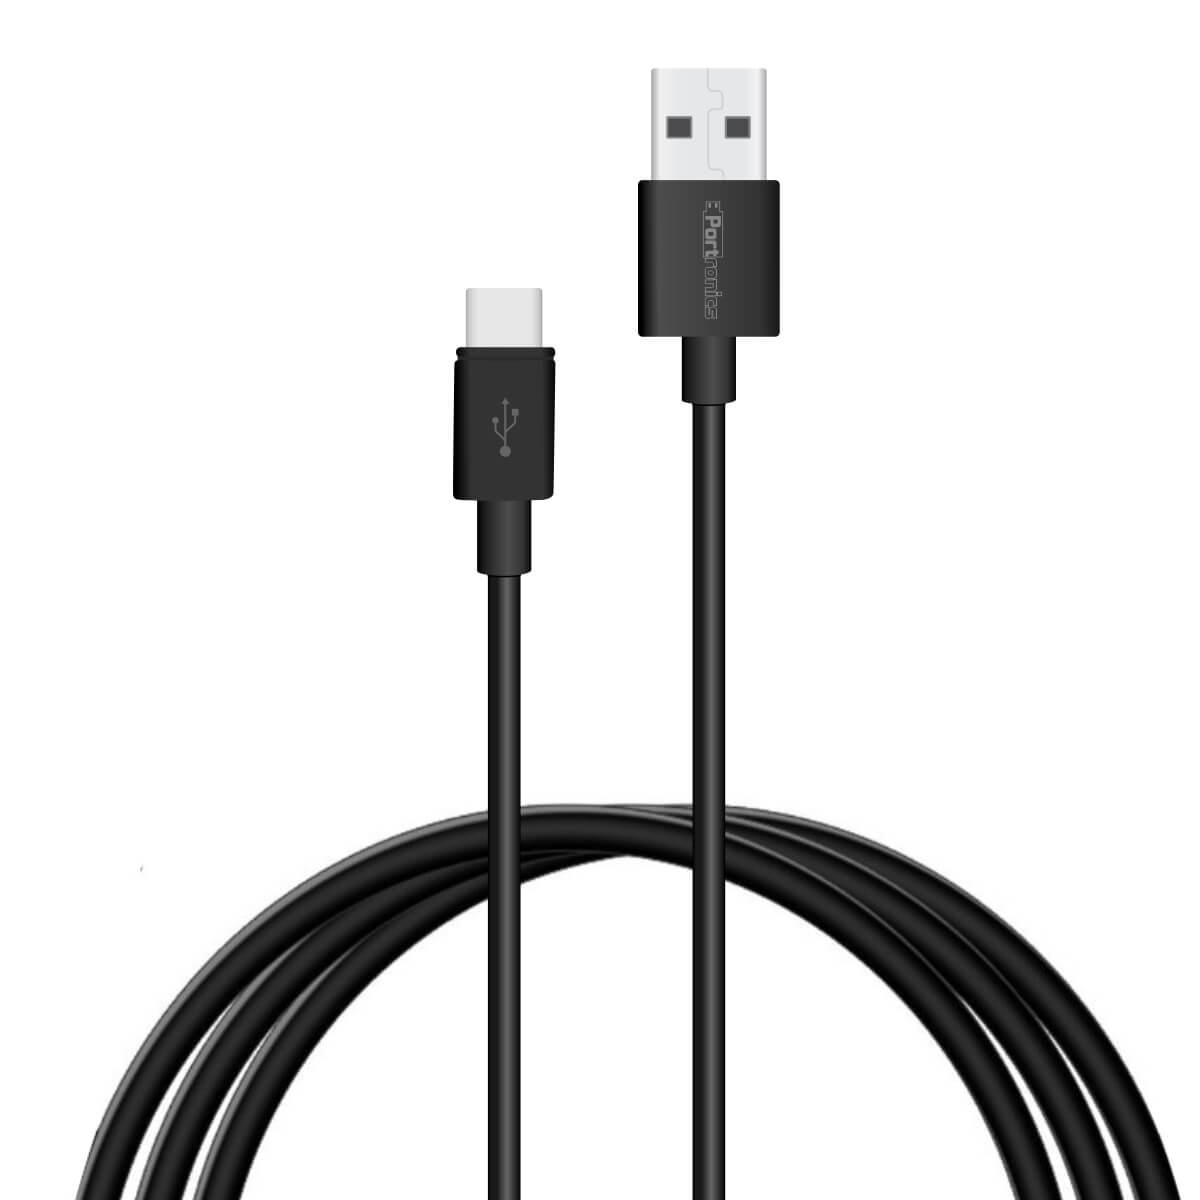 Portronics Konnect Core Plus POR-1086, 3.0A 2Meter Type-C Cable with Charge & Sync Function for All Type-C Devices (Black)